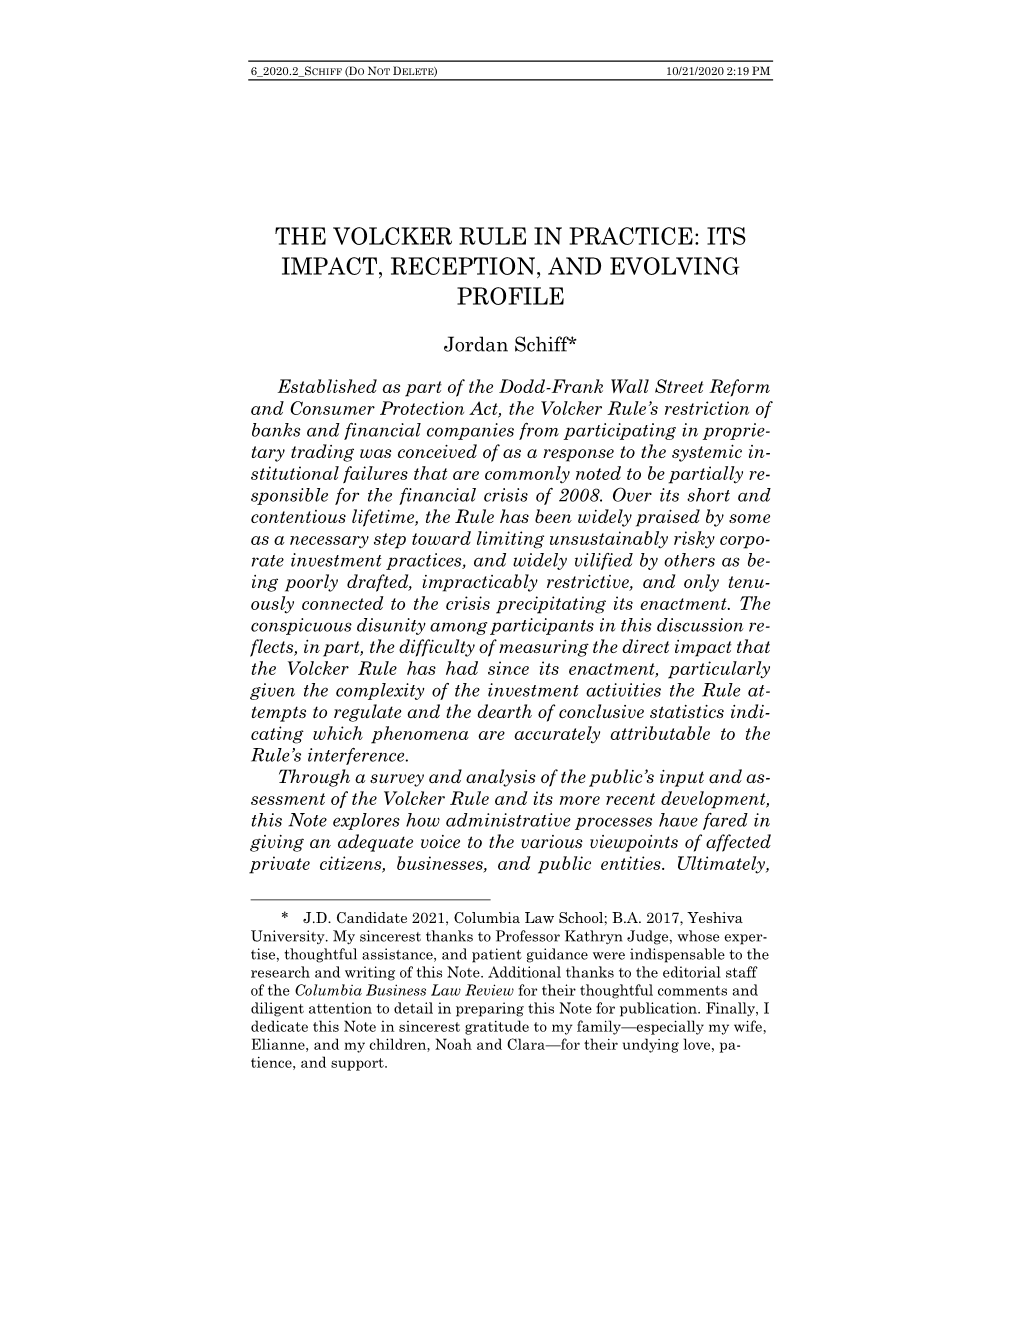 The Volcker Rule in Practice: Its Impact, Reception, and Evolving Profile